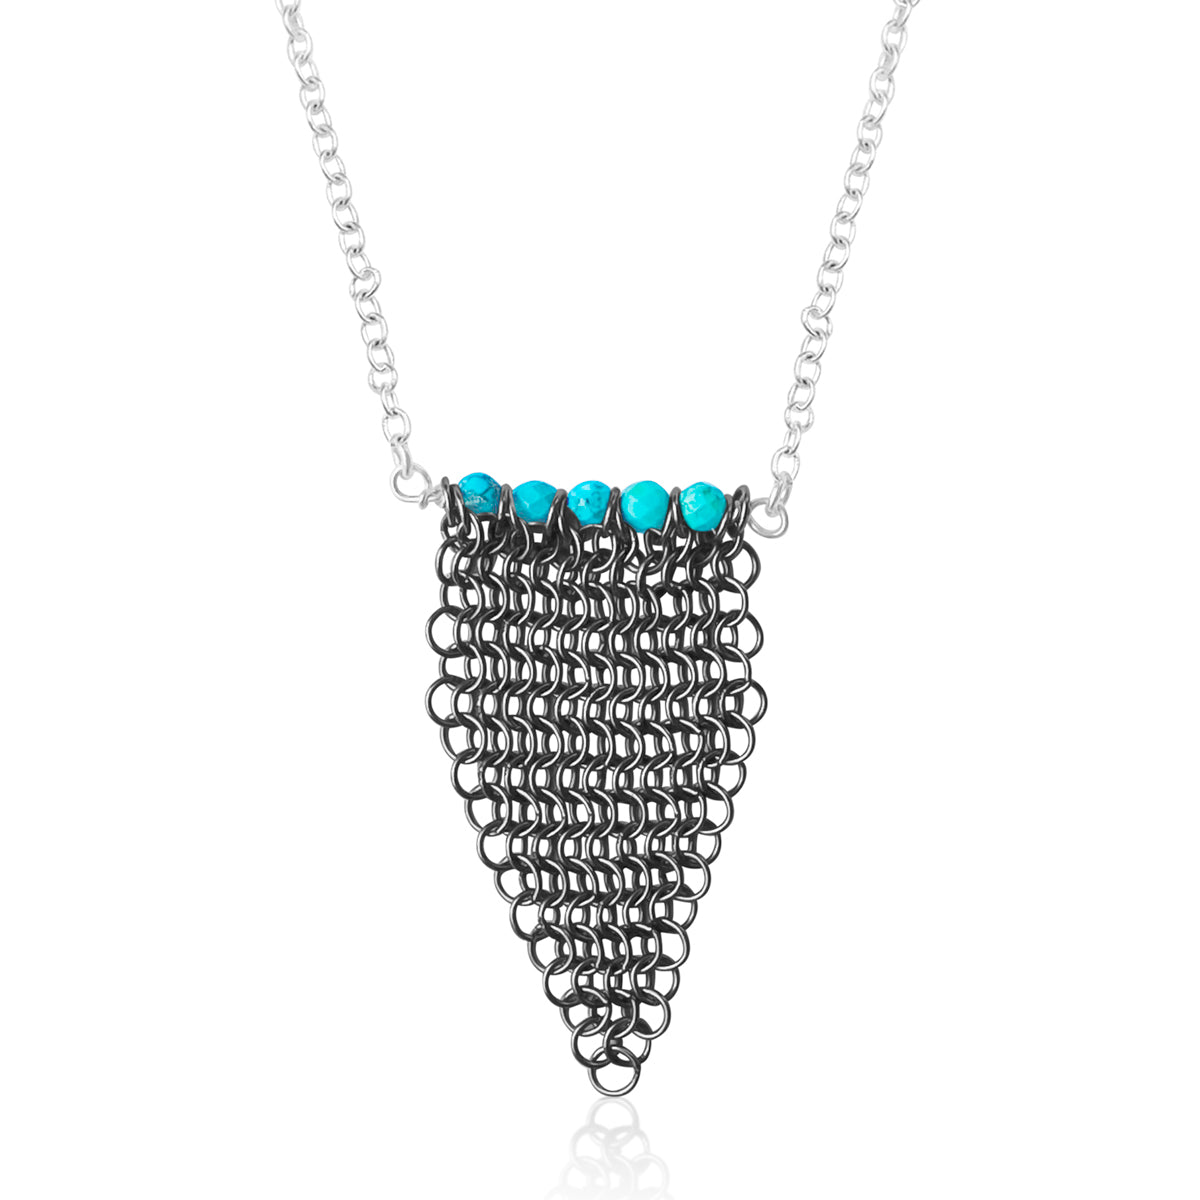 Repurposed Shark Chainmail Suit Necklace with Turquoise